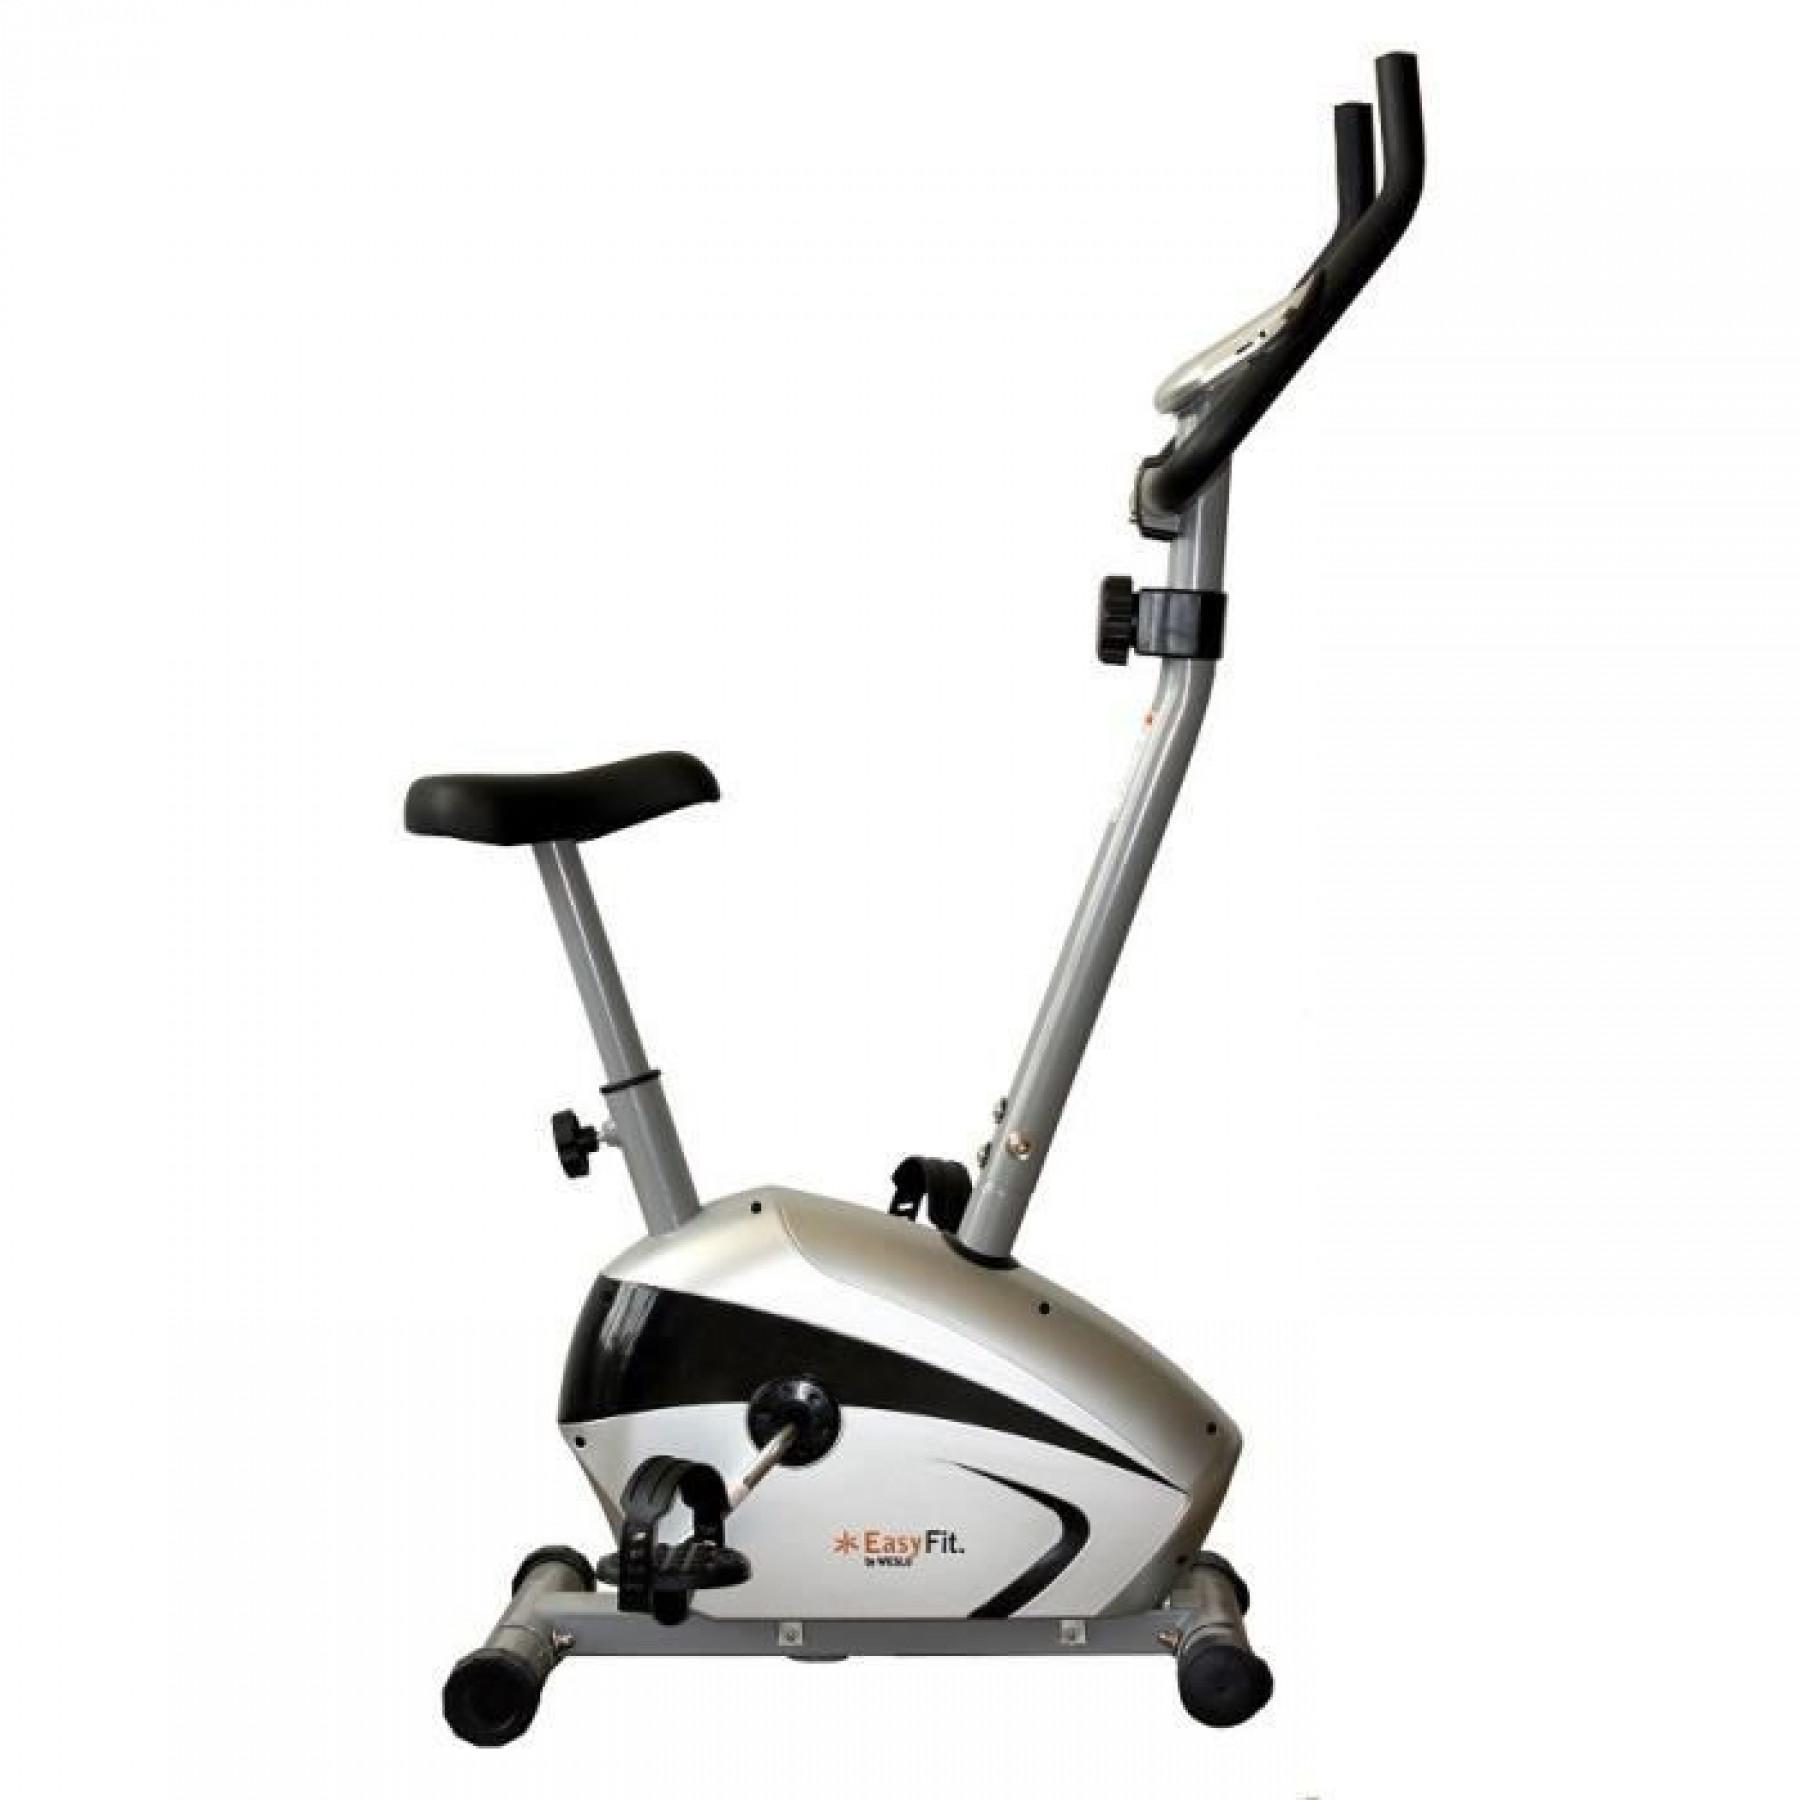 Rower treningowy Weslo Easy Fit 220